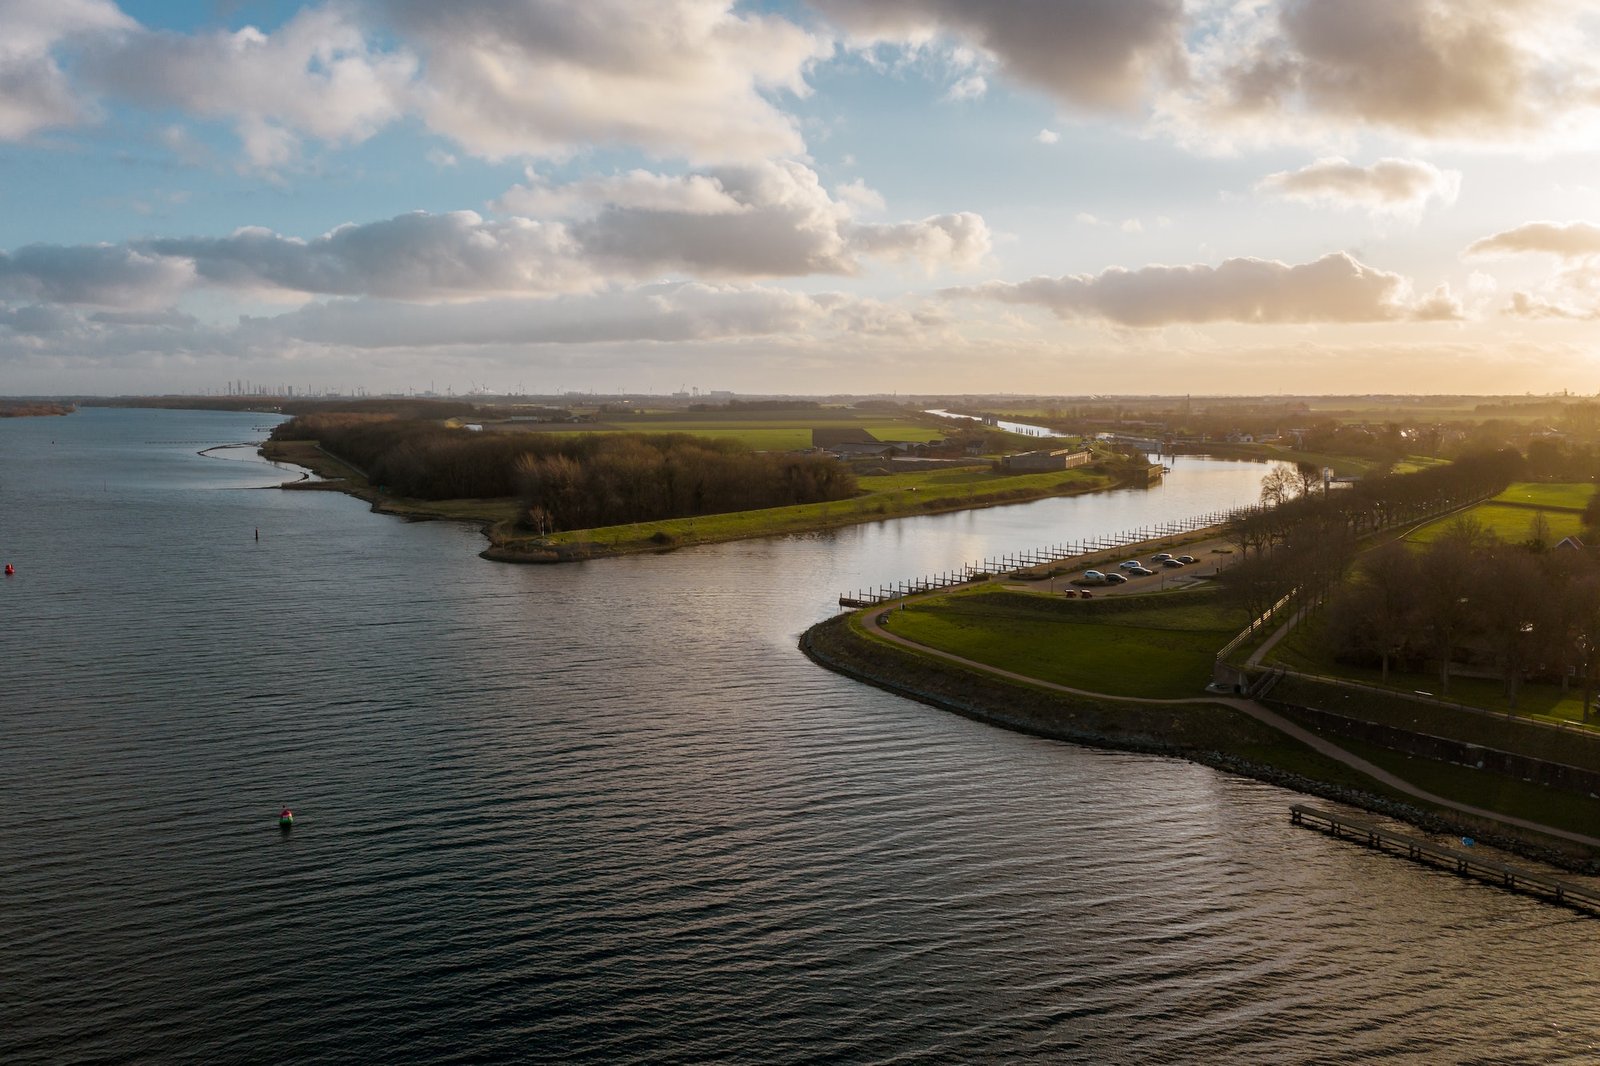 High angle shot of a beautiful river under a cloudy sky in Veere, The Neverlands